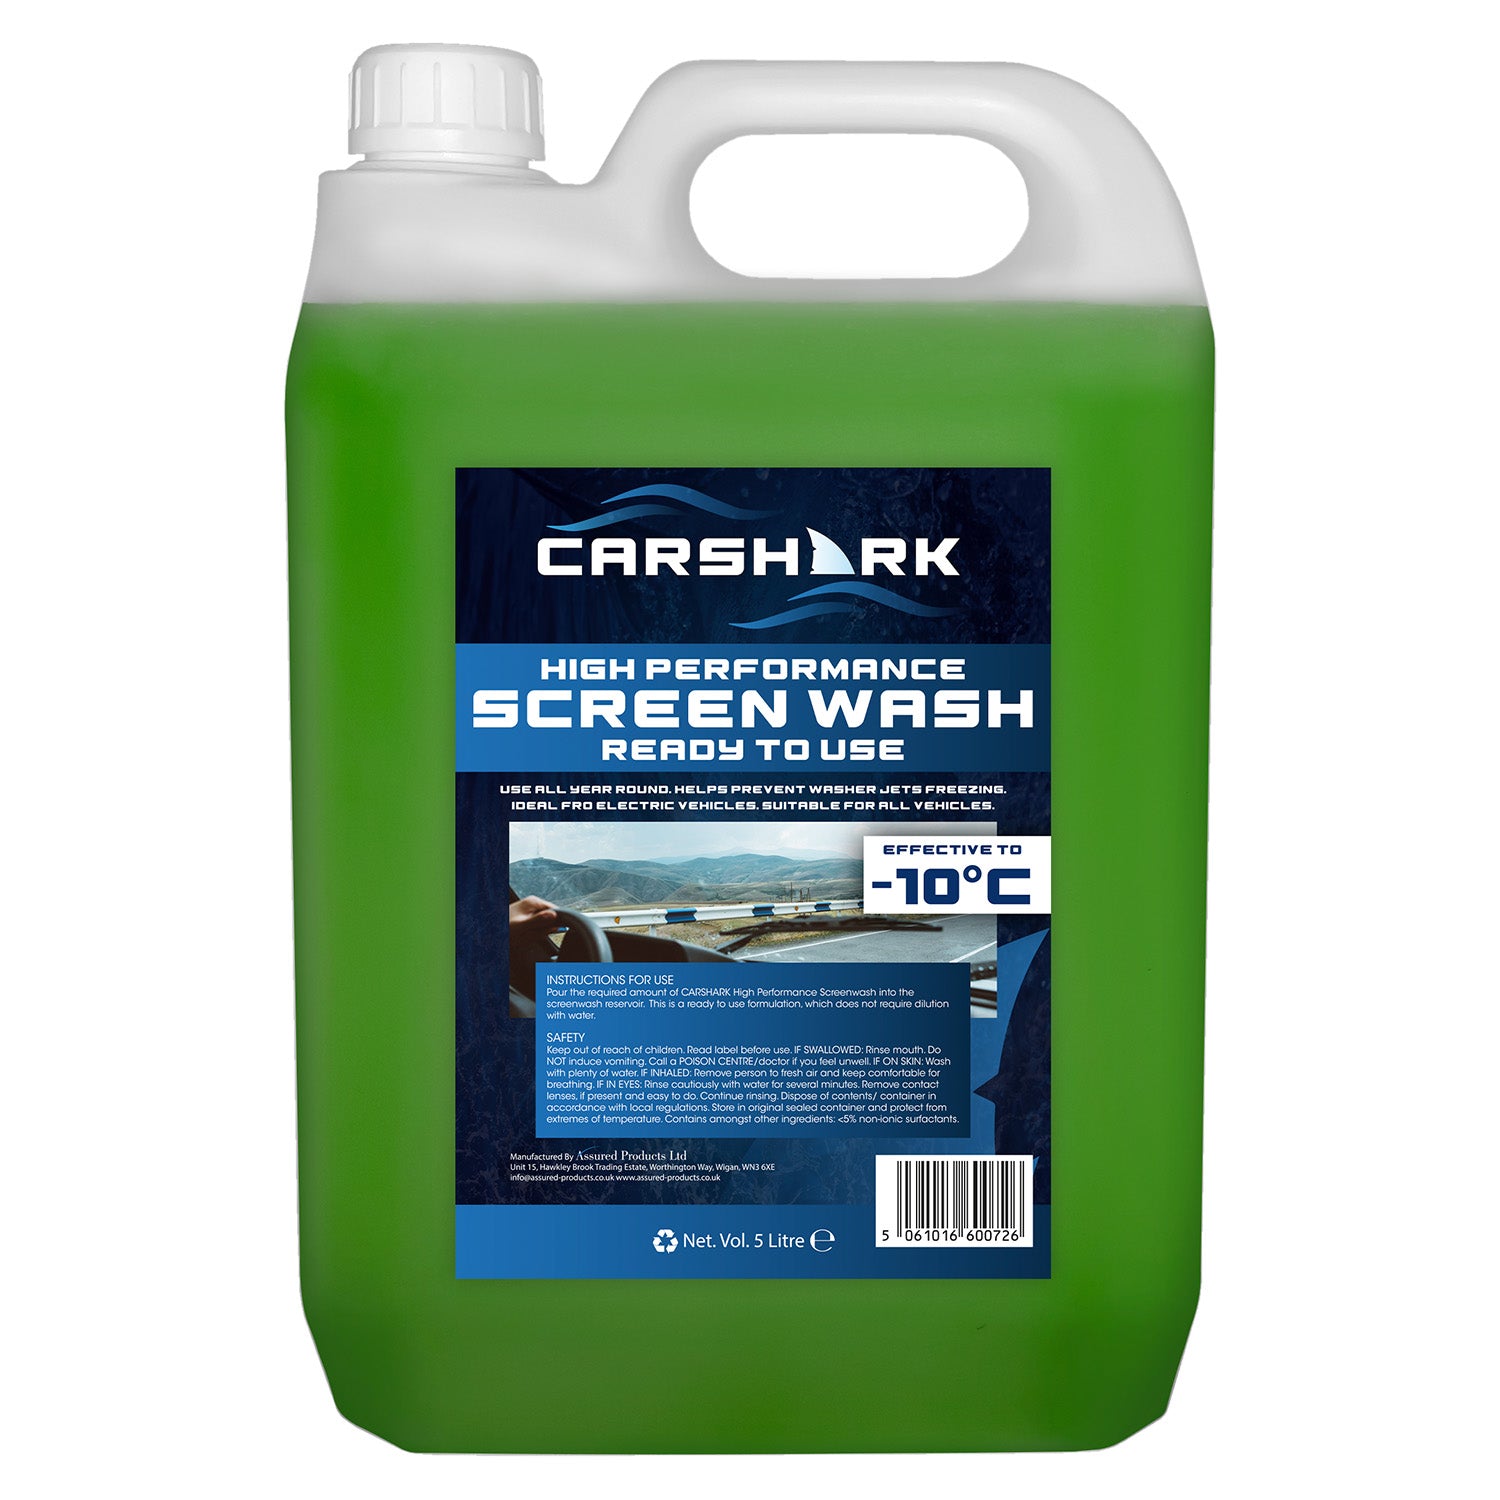 CARSHARK Winter High Performance Screenwash 5L Effective down to -10°C